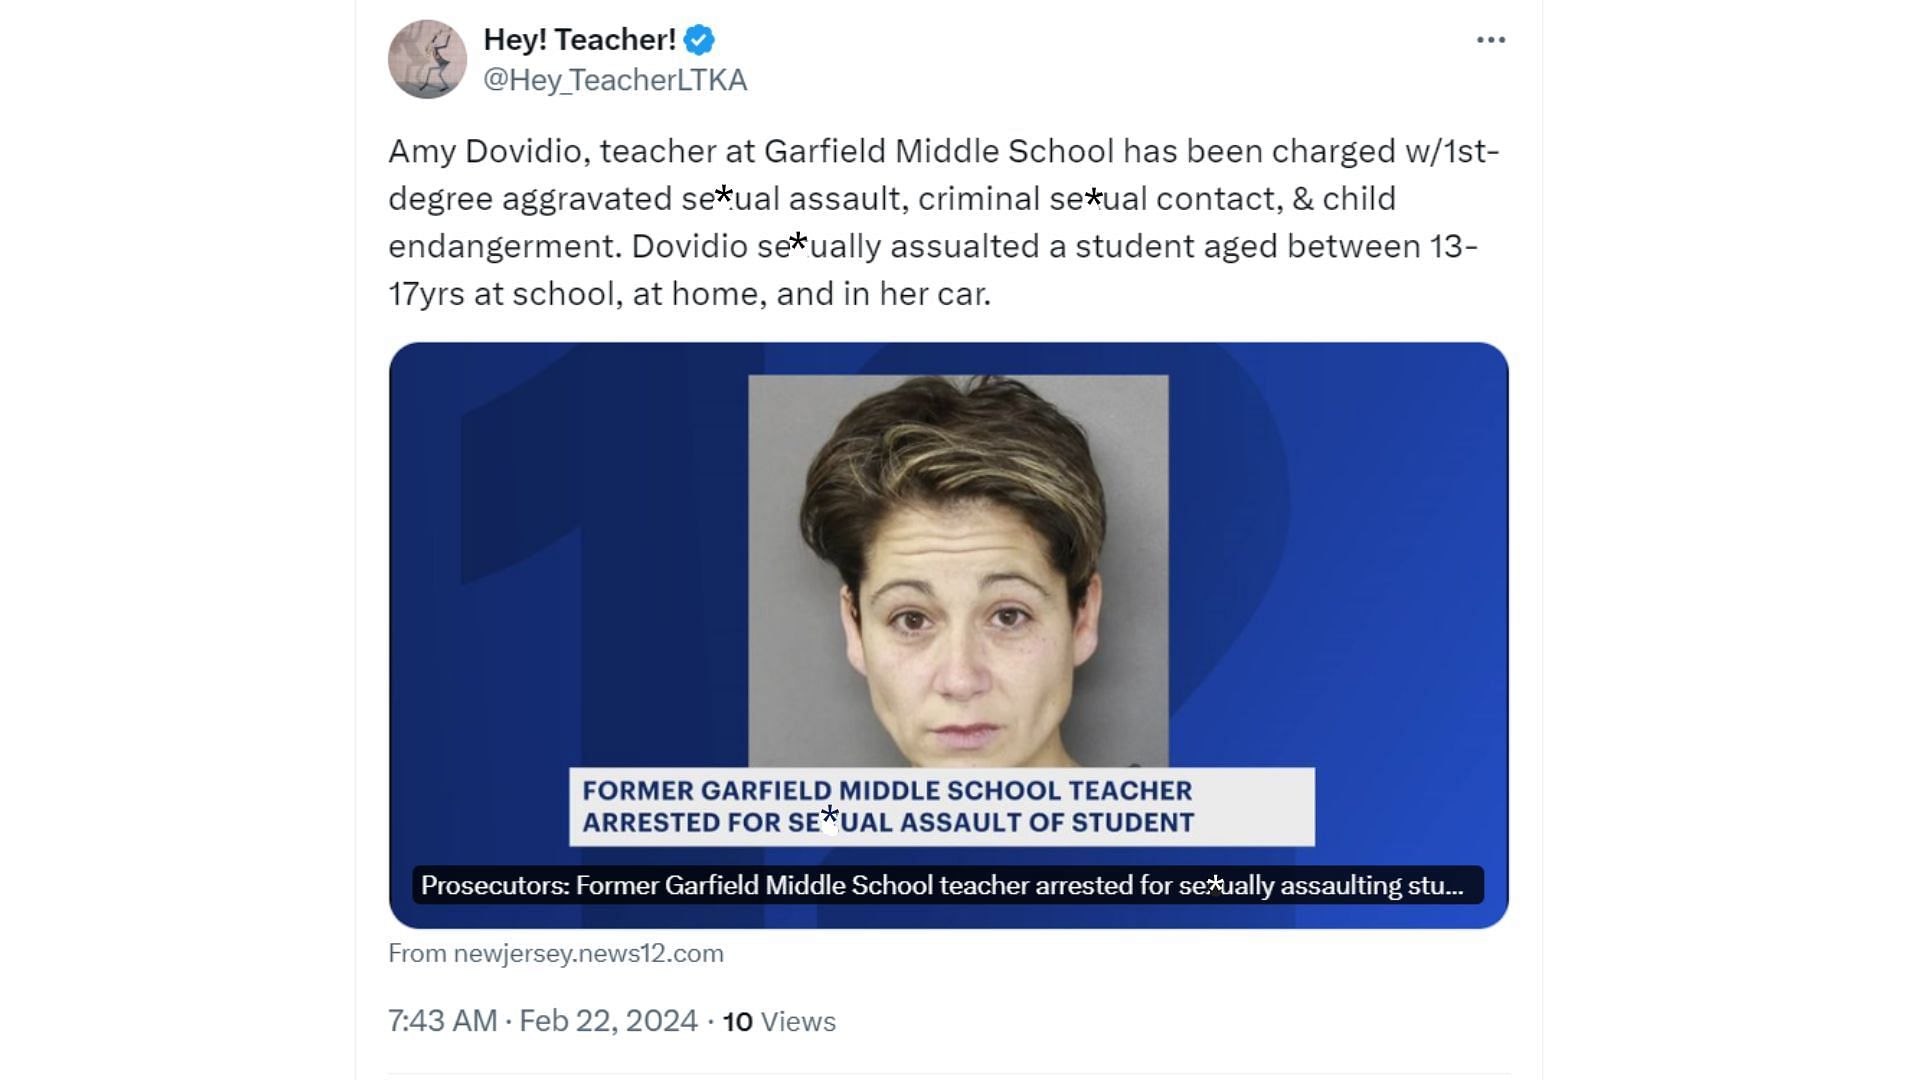 Amy Dovidio was charged with aggravated s*xual assault